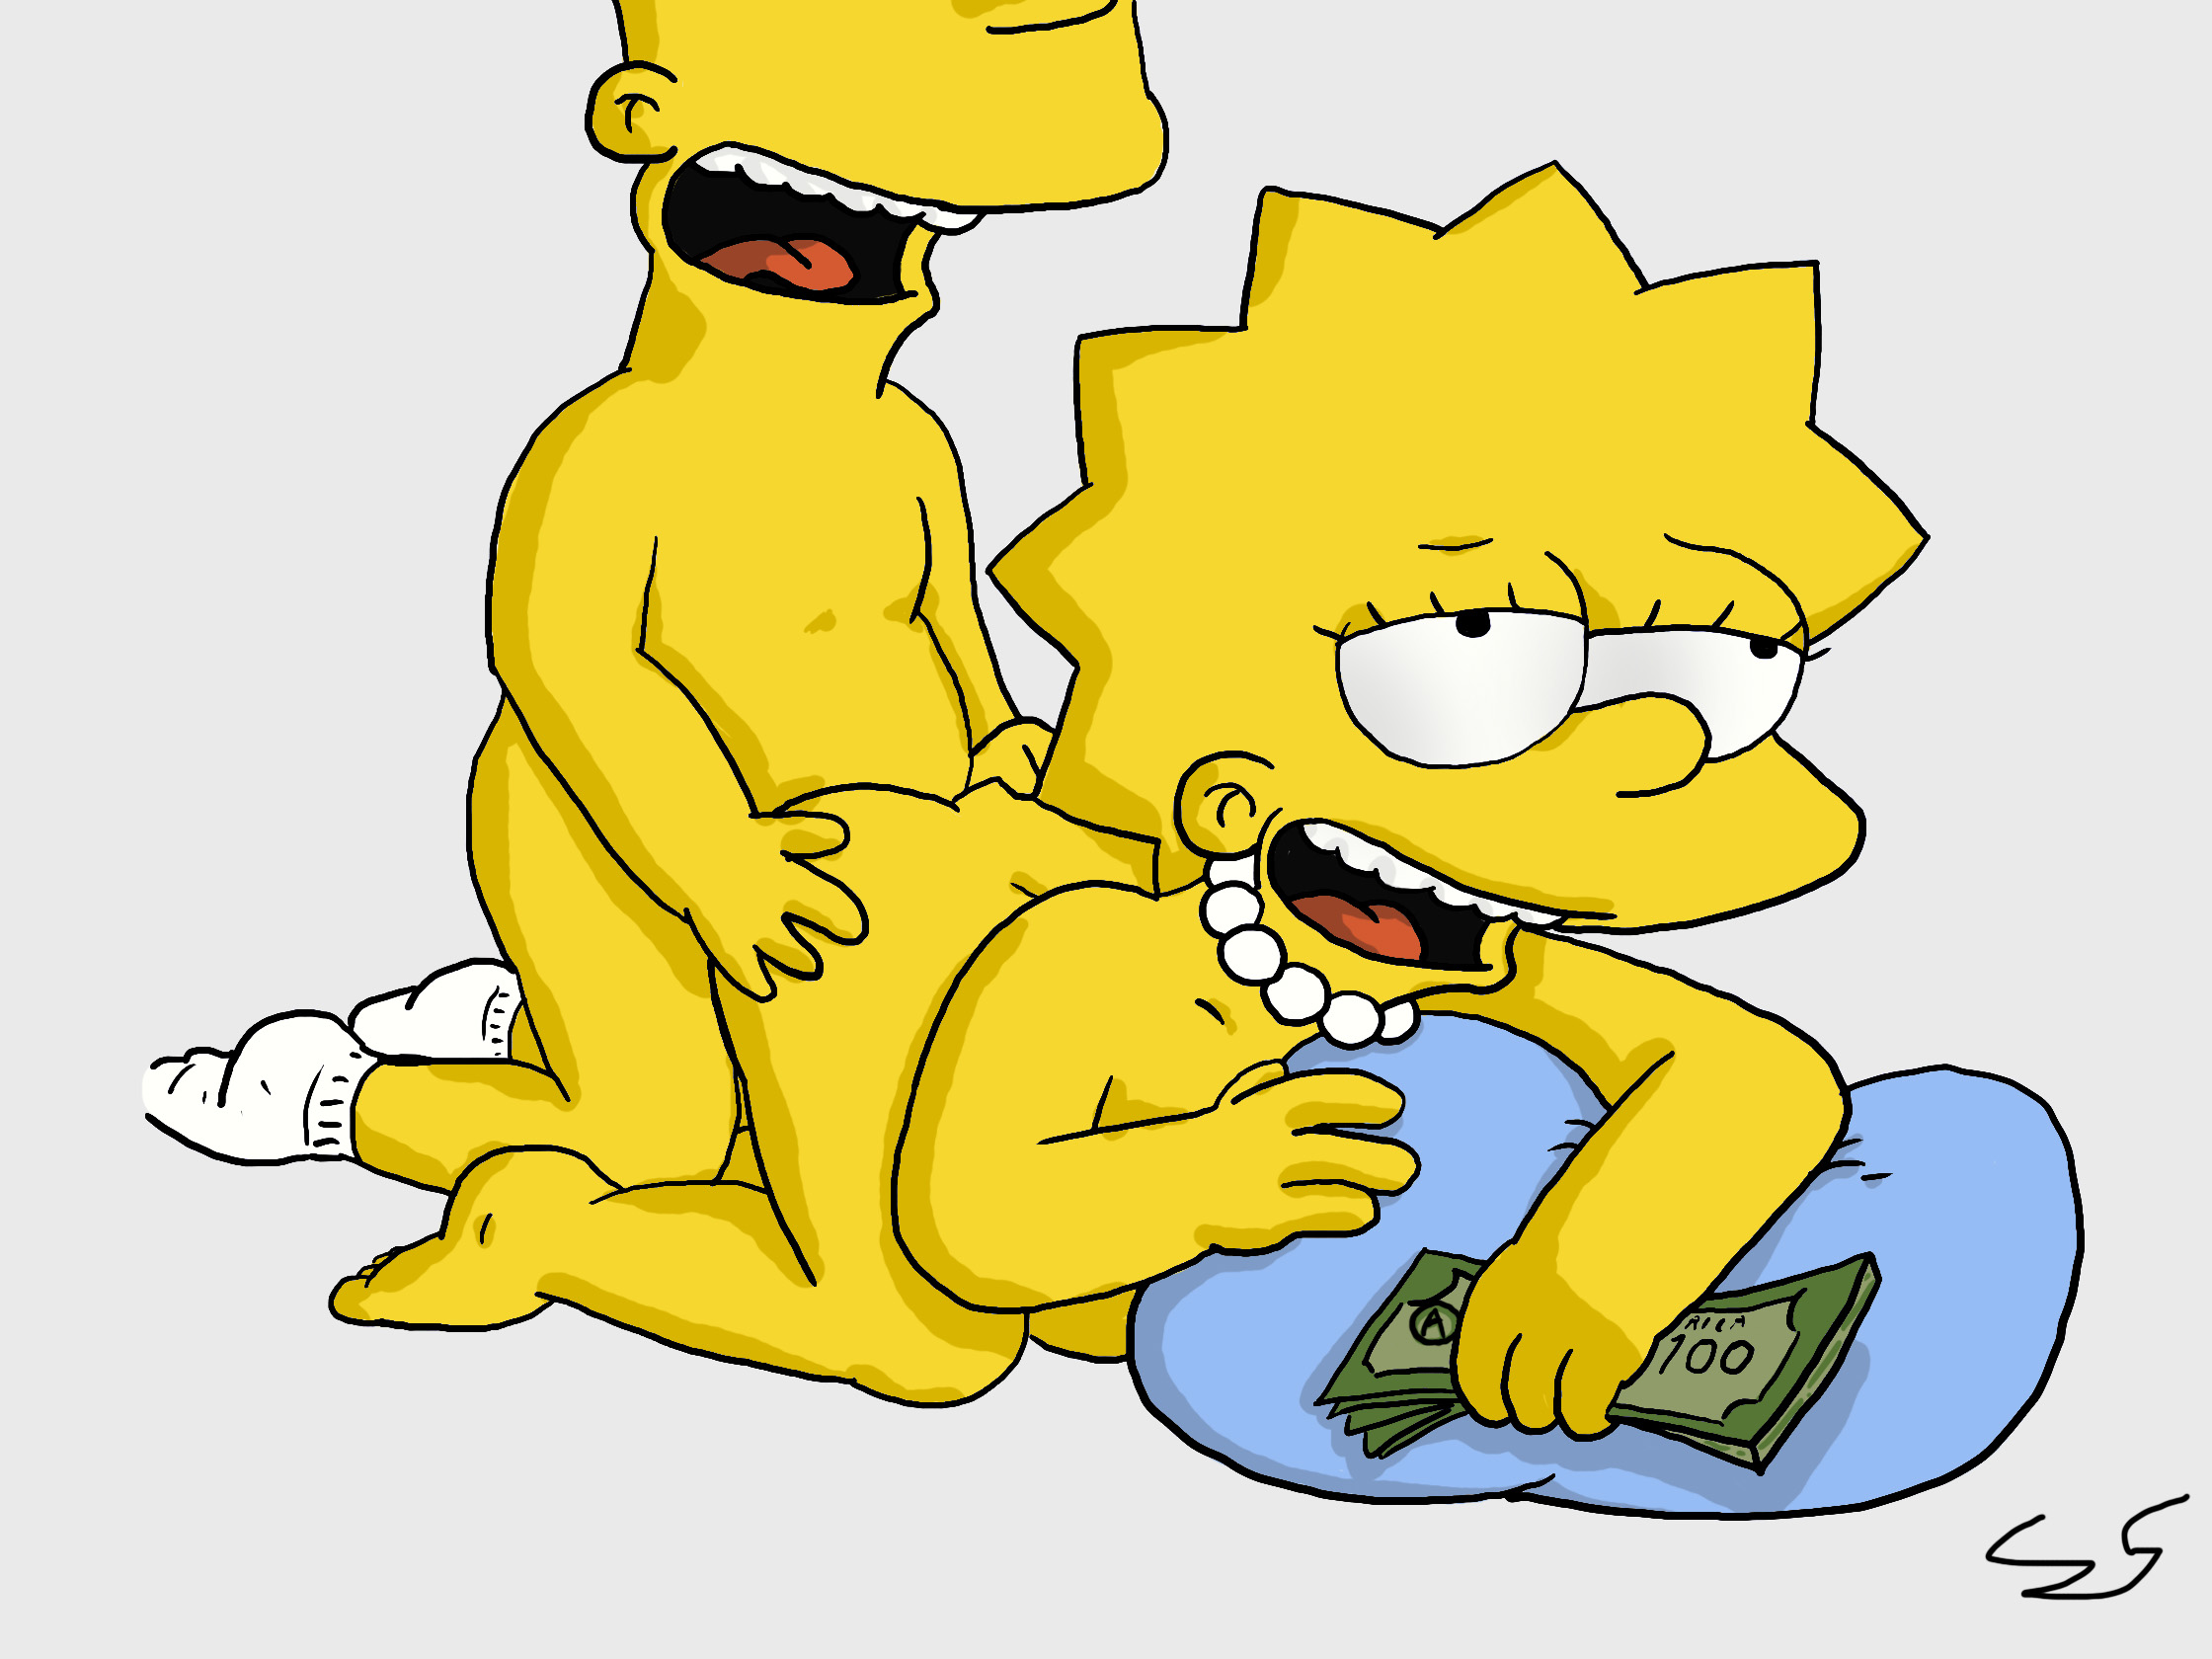 Huge Dick Bart Simpson Porn - For free! - Simpsons Porn Pictures Bart - Very Simple!